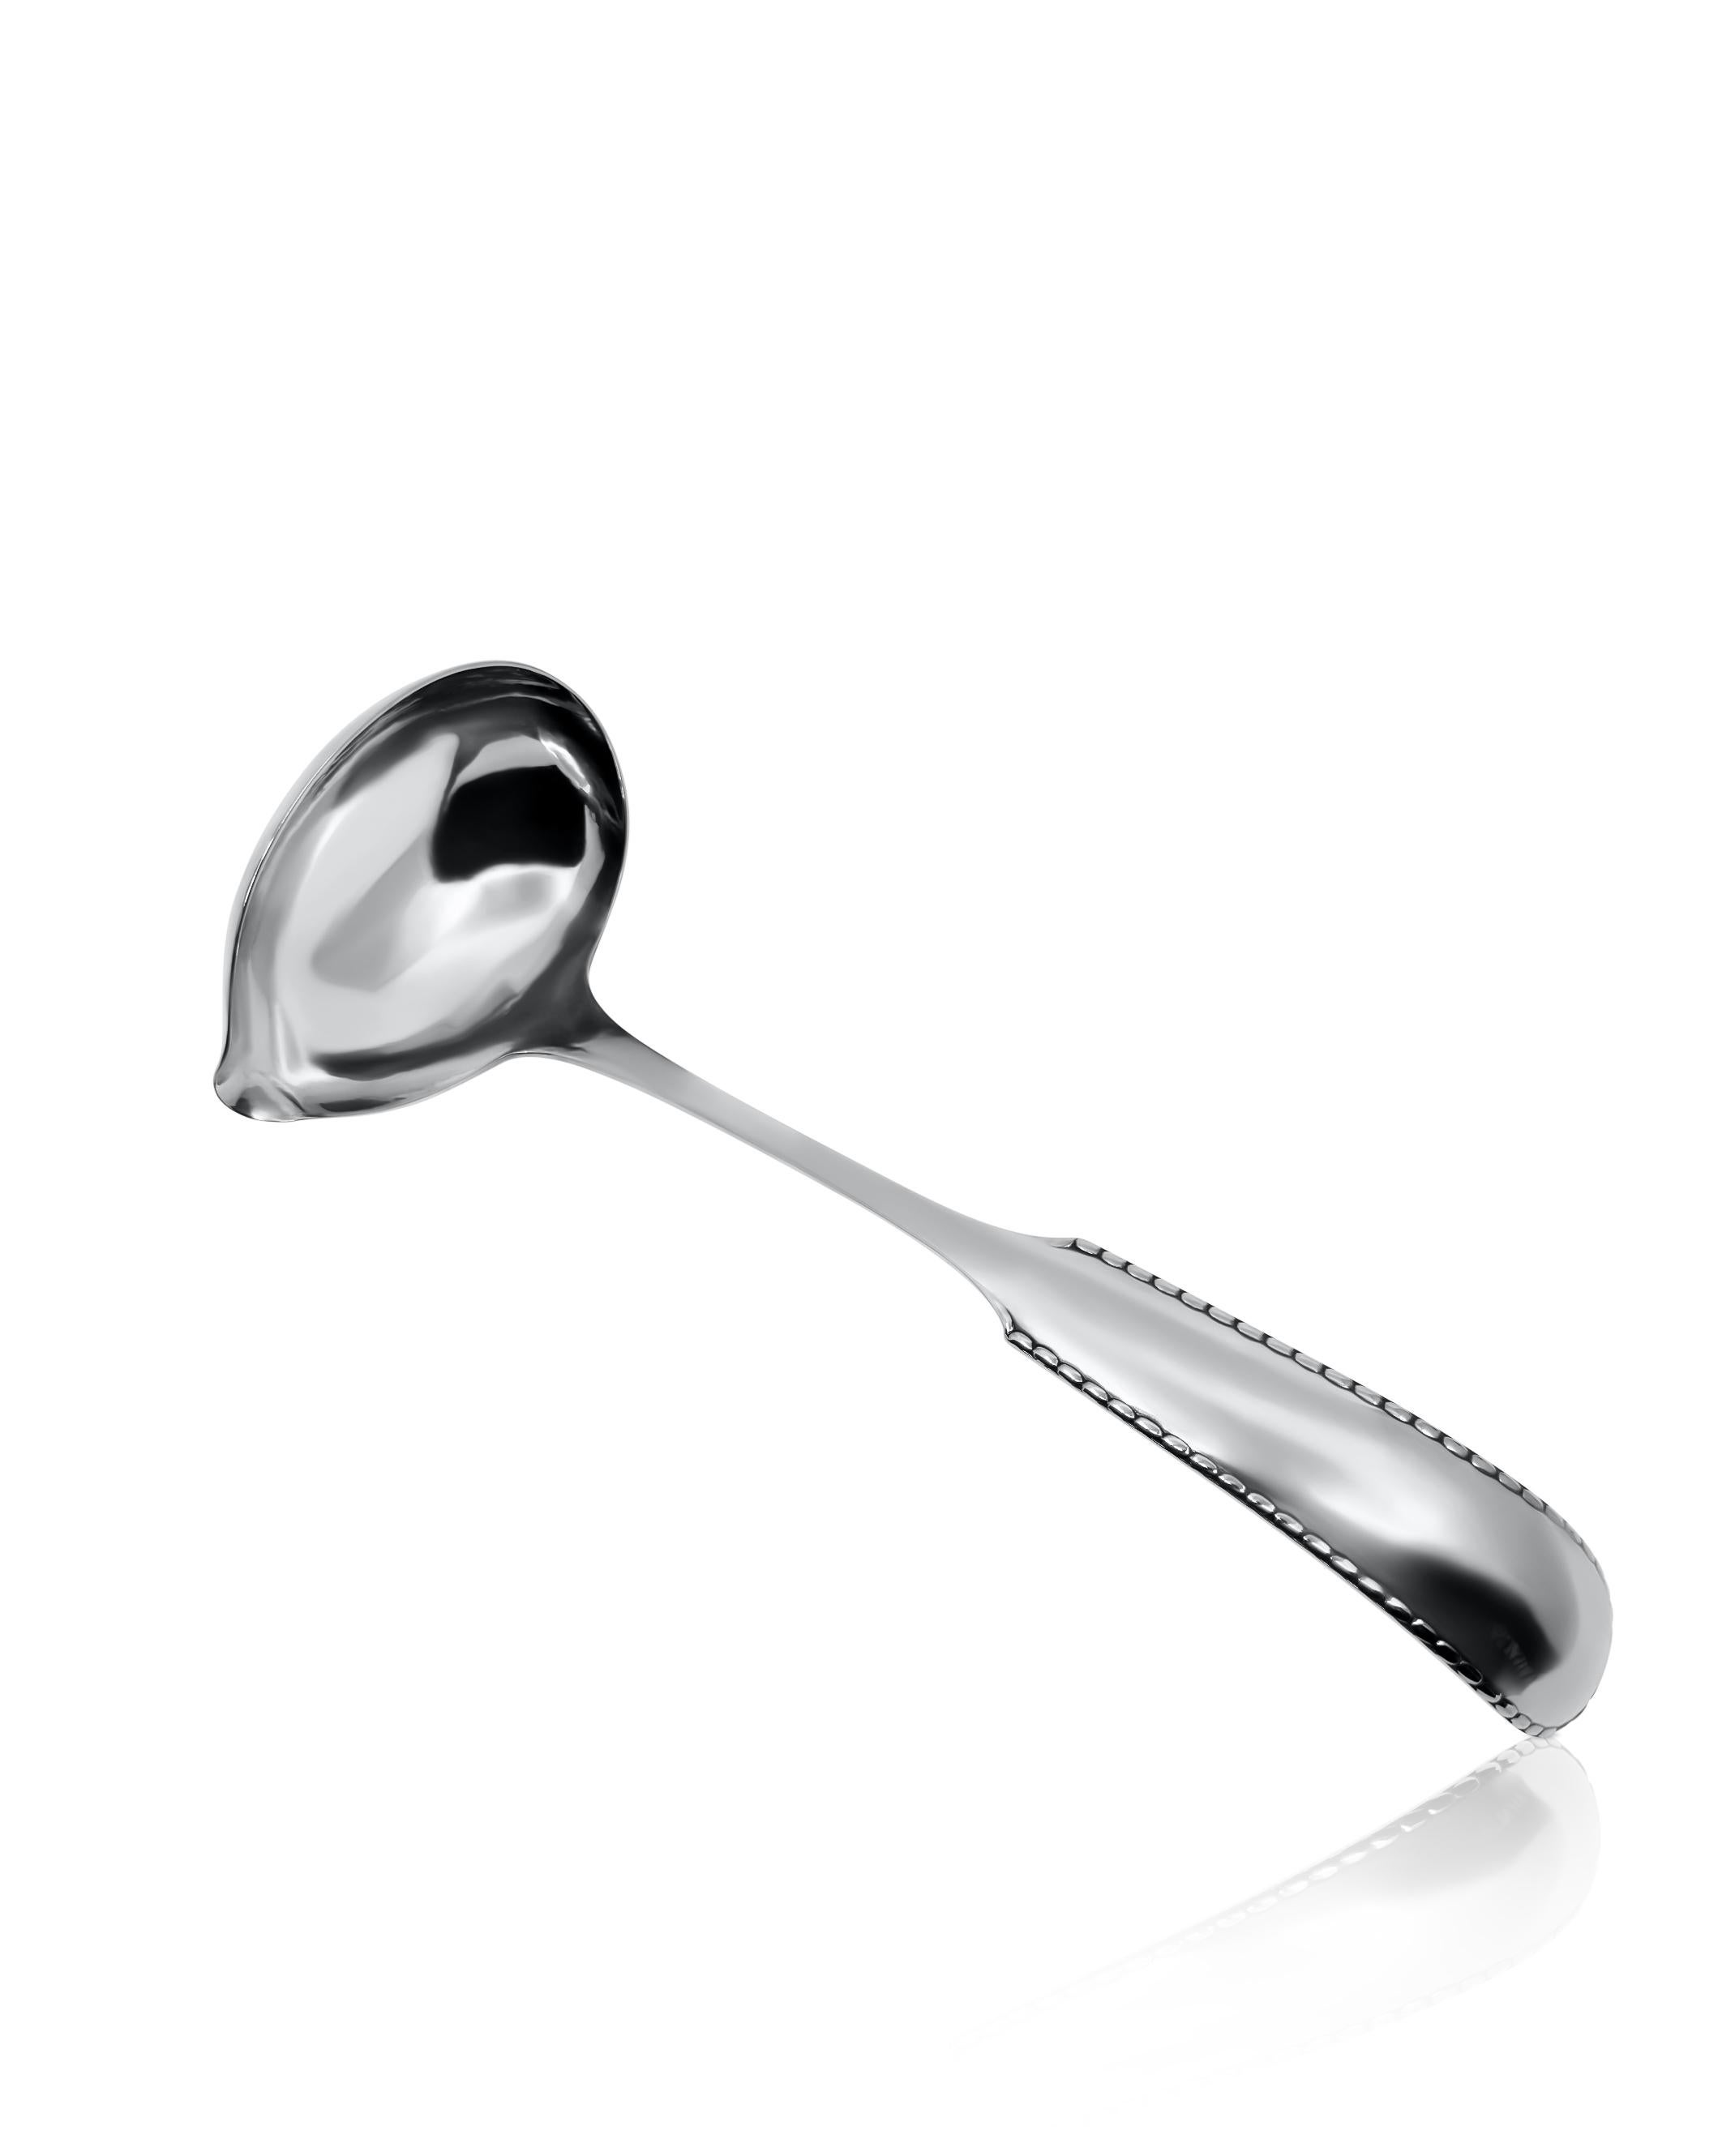 an oversized punch ladle from Georg Jensen crafted in 830 sterling silver, adorned with the iconic Rope/Perle pattern, marked as #151. This substantial ladle boasts meticulous hand-hammered construction, featuring a hand-forged spout. The gracefully